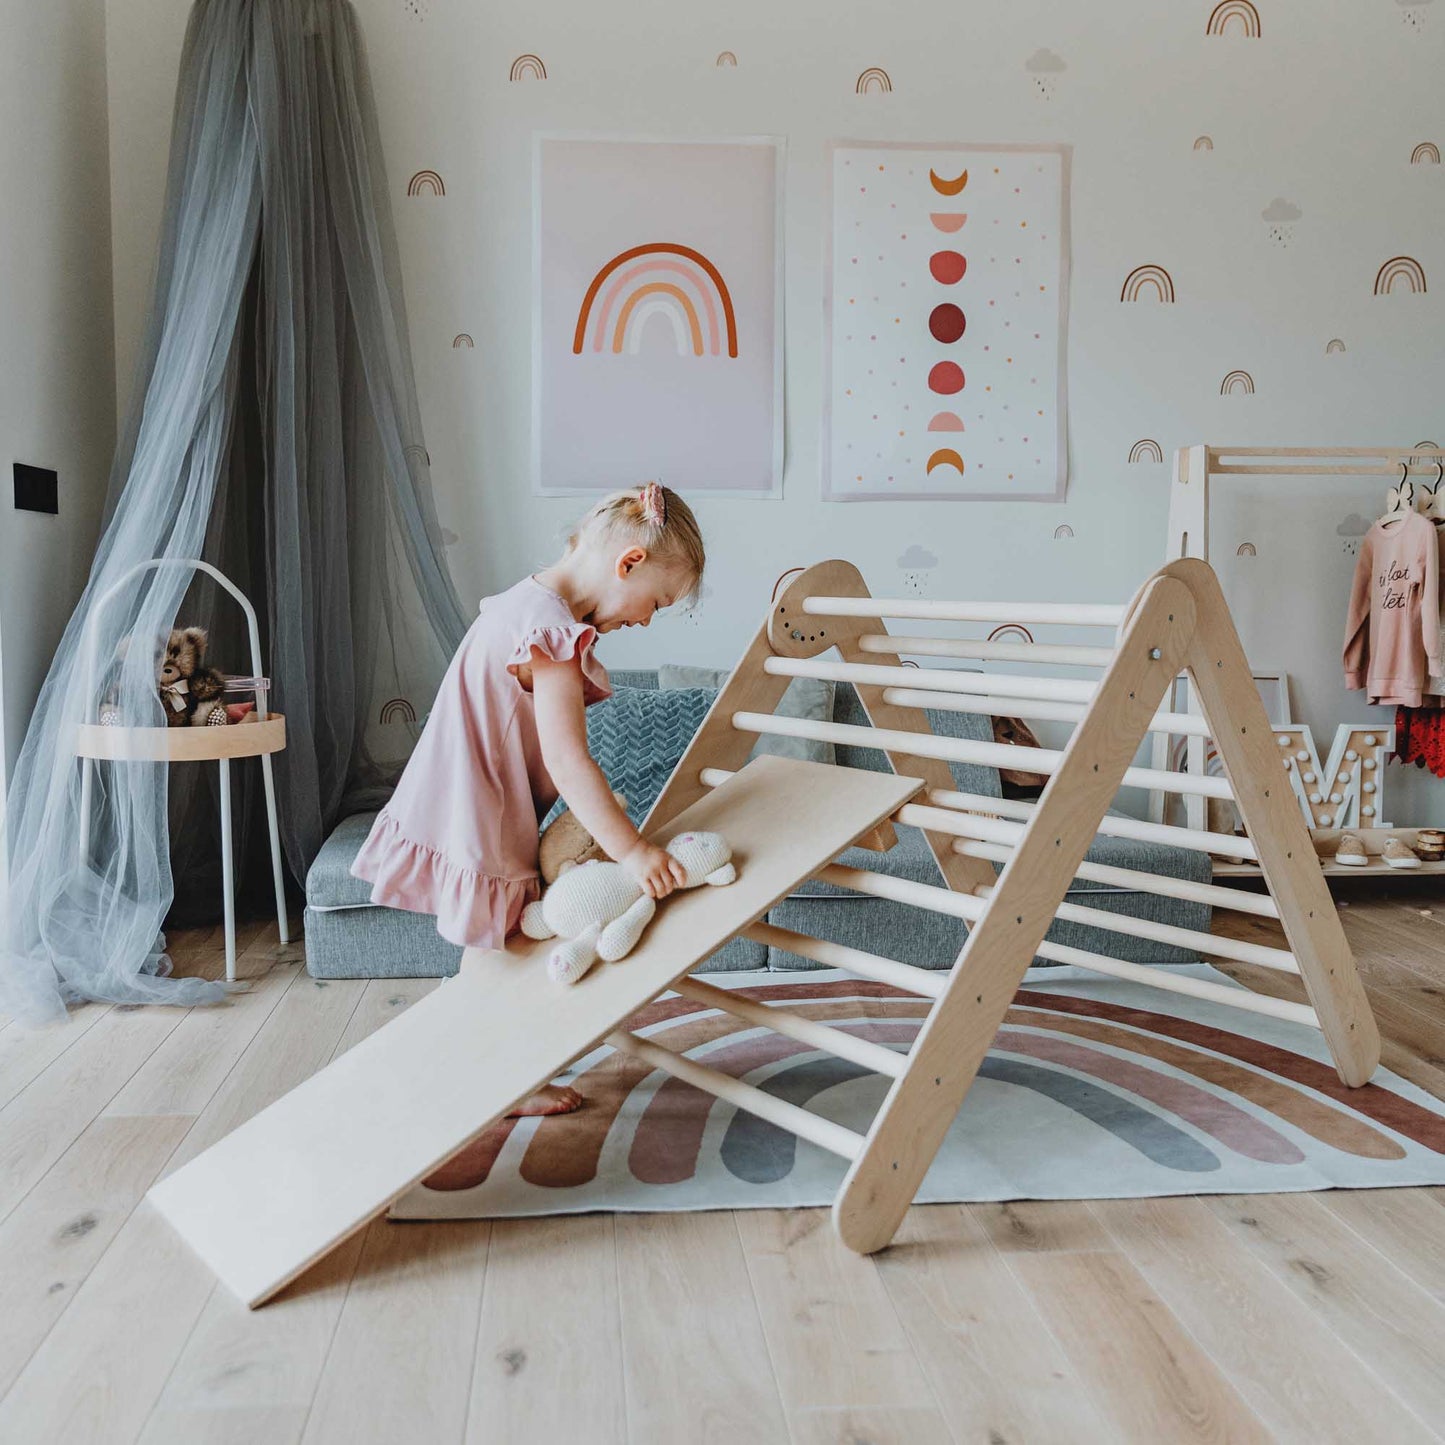 A baby playing with an eco-friendly Climbing triangle + Foldable climbing triangle + a ramp in her room.